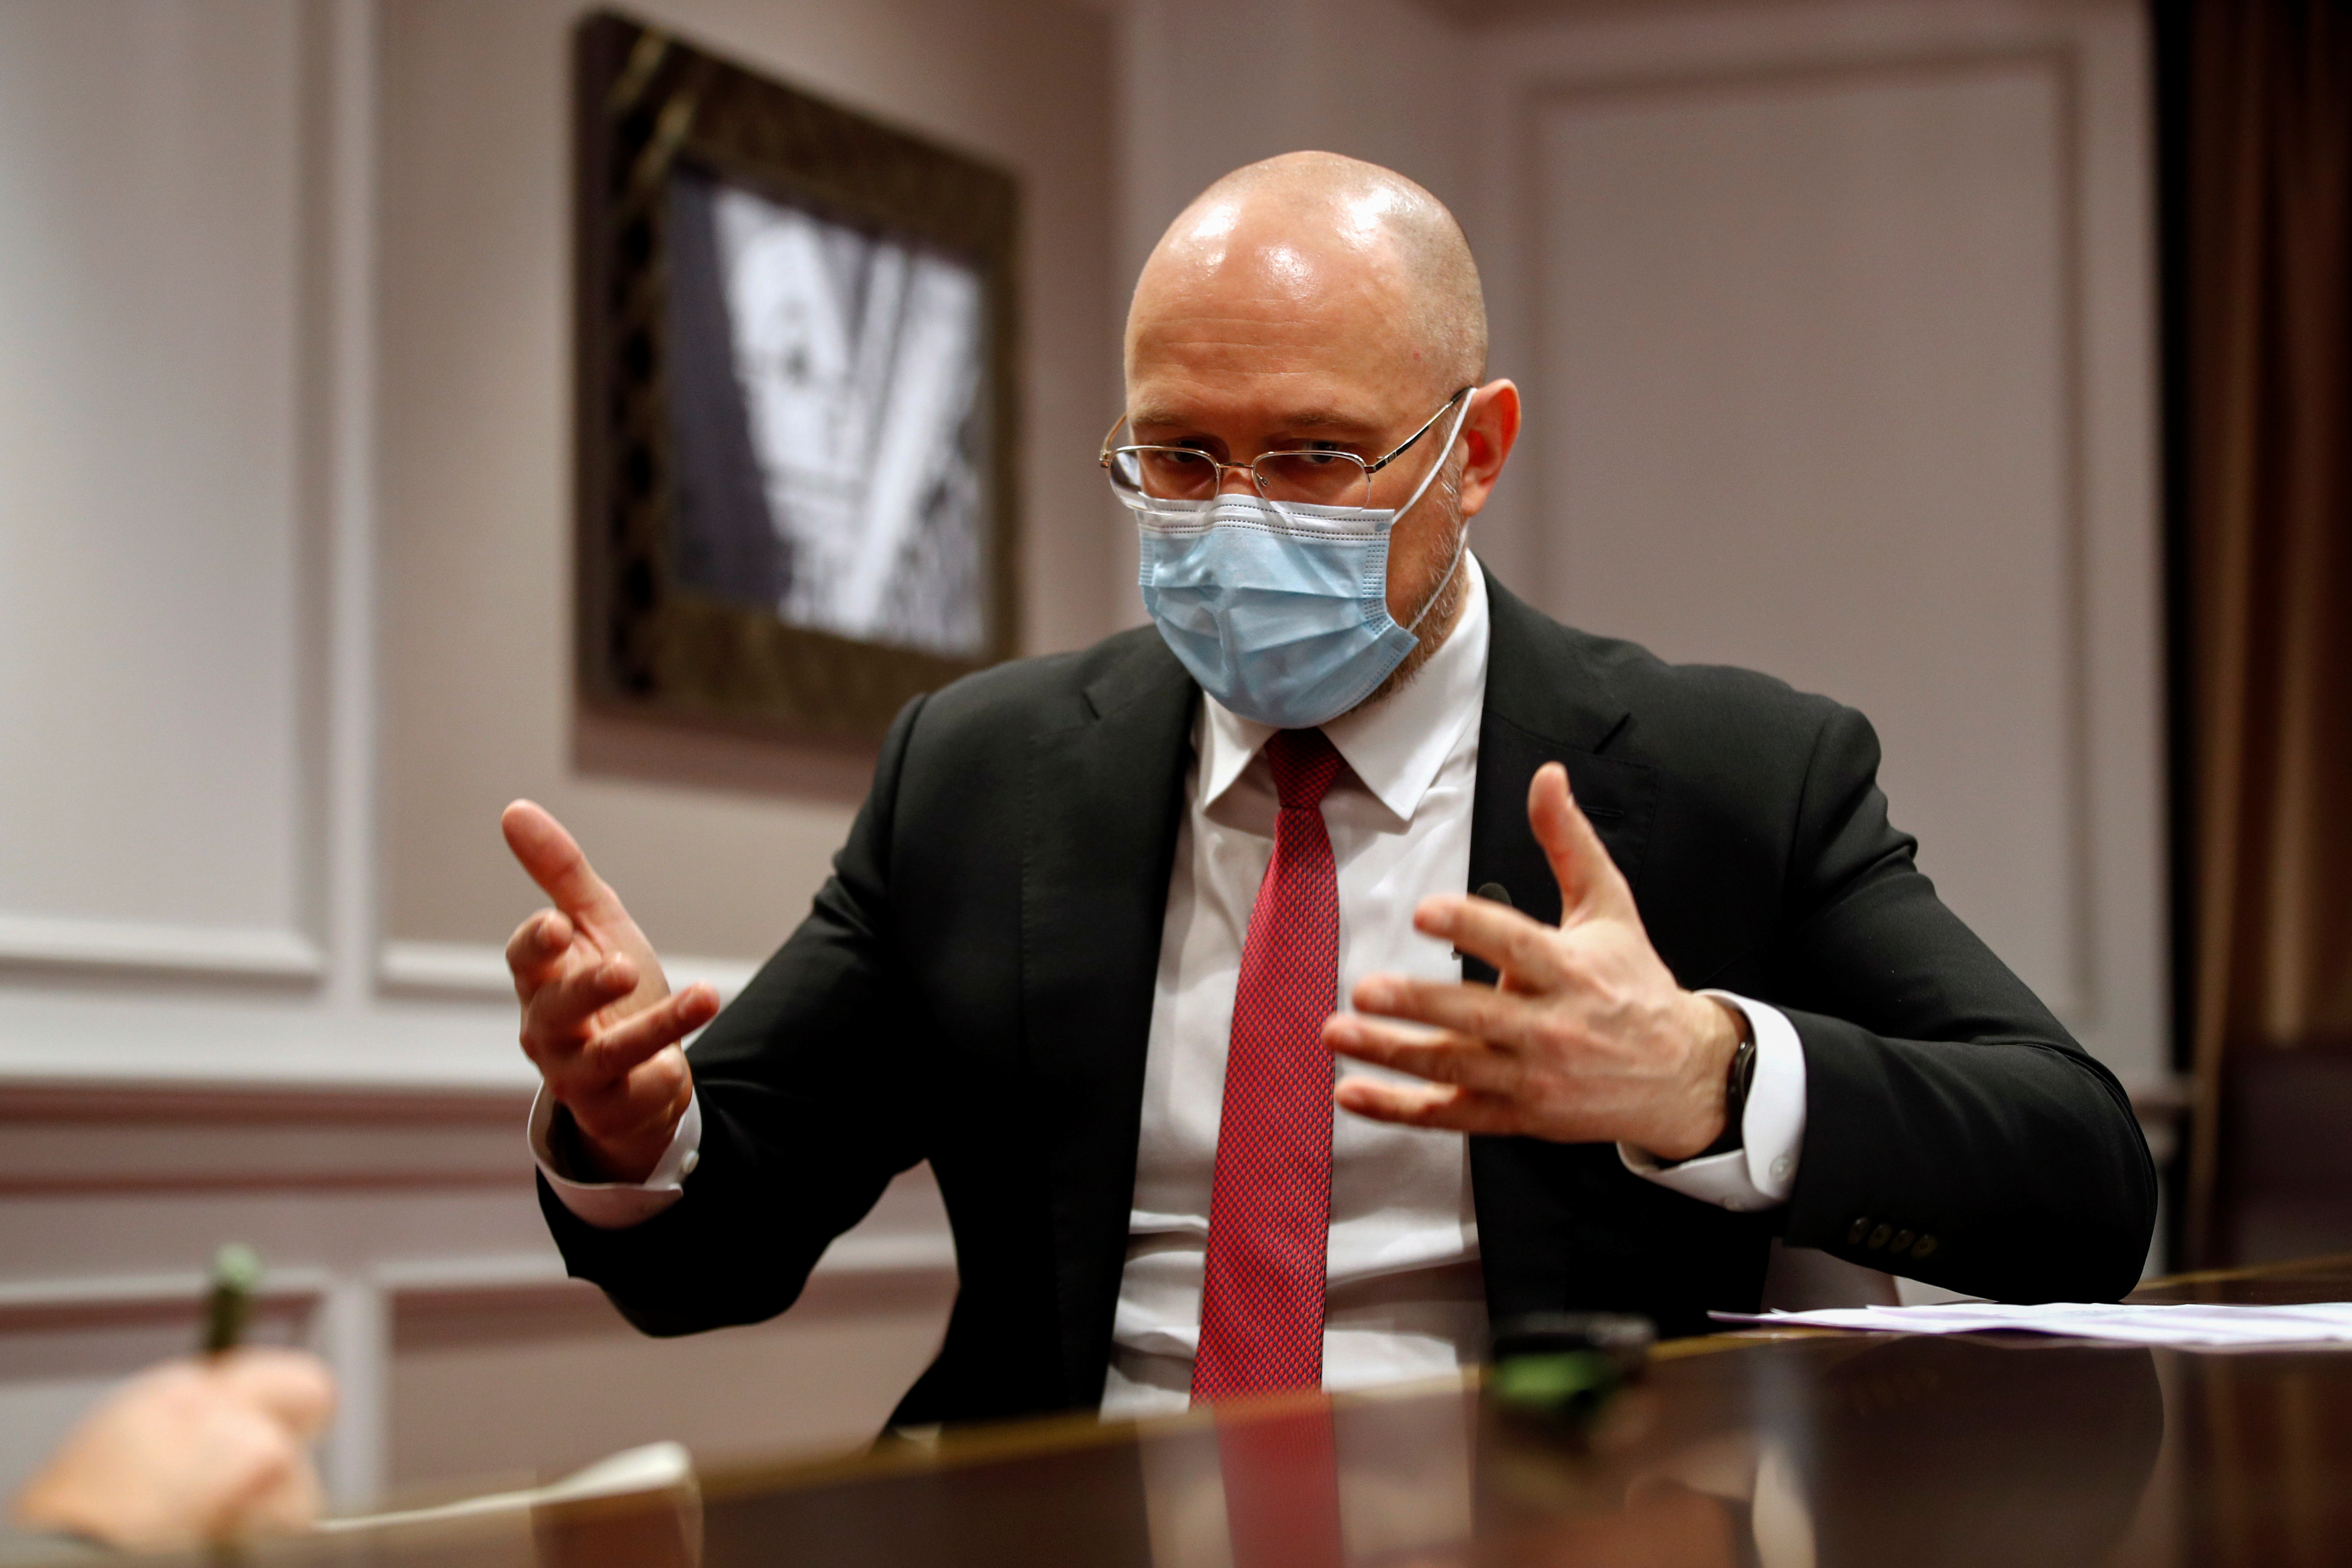 Ukraine's Prime Minister Denys Shmygal talks during an interview with Reuters in Brussels